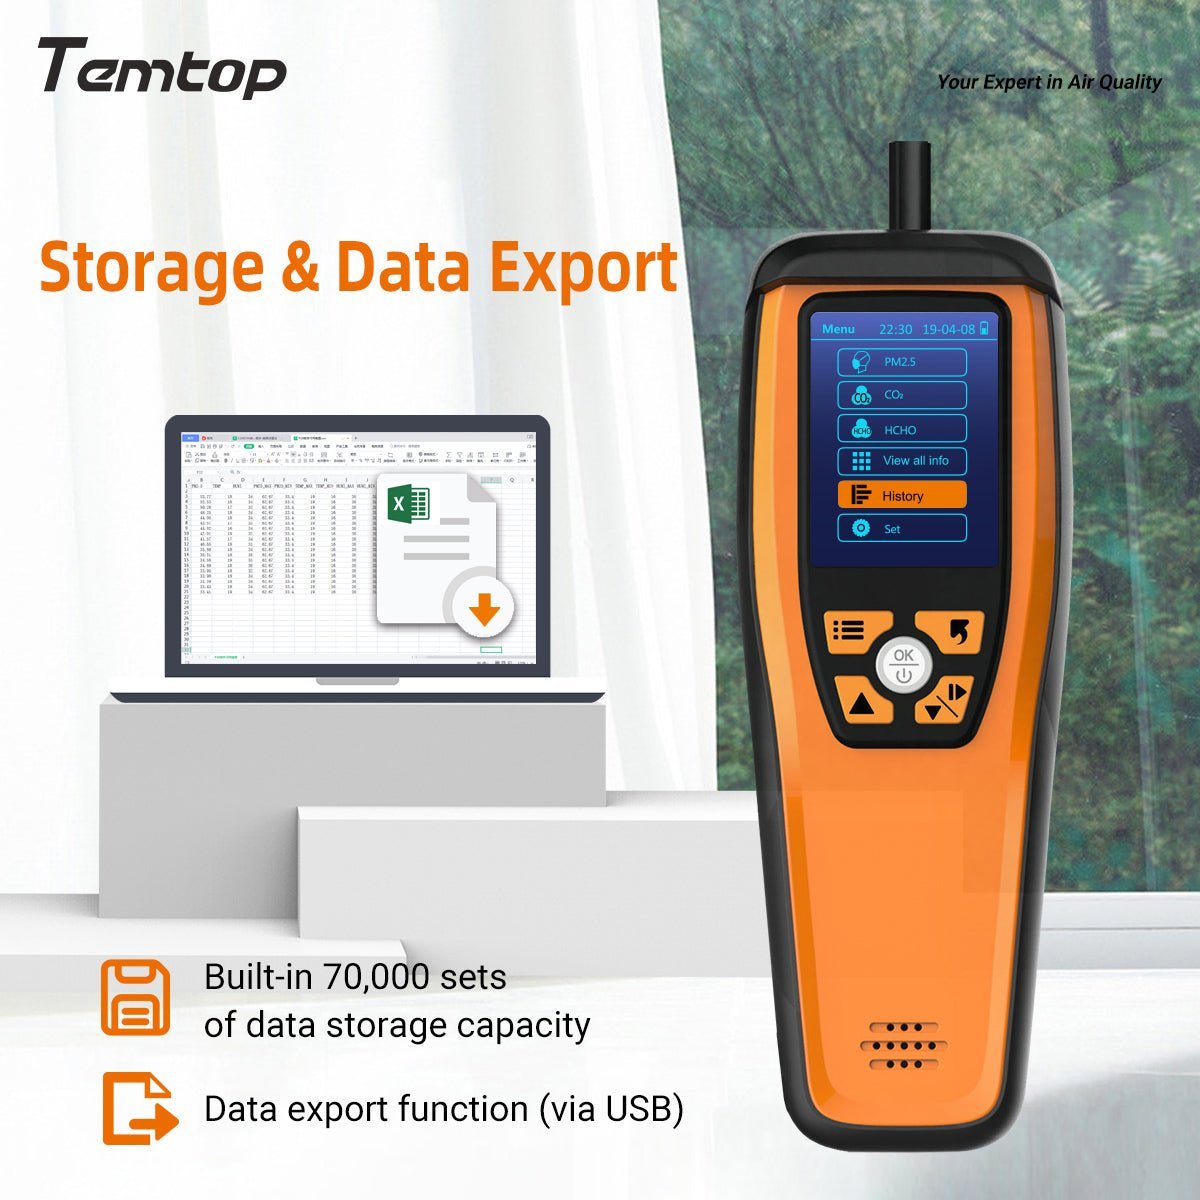 Temtop M2000 2nd CO2 Monitor Portable Air Quality Sensor of Carbon Dioxide PM2.5 PM10 Formaldehyde - Temtop